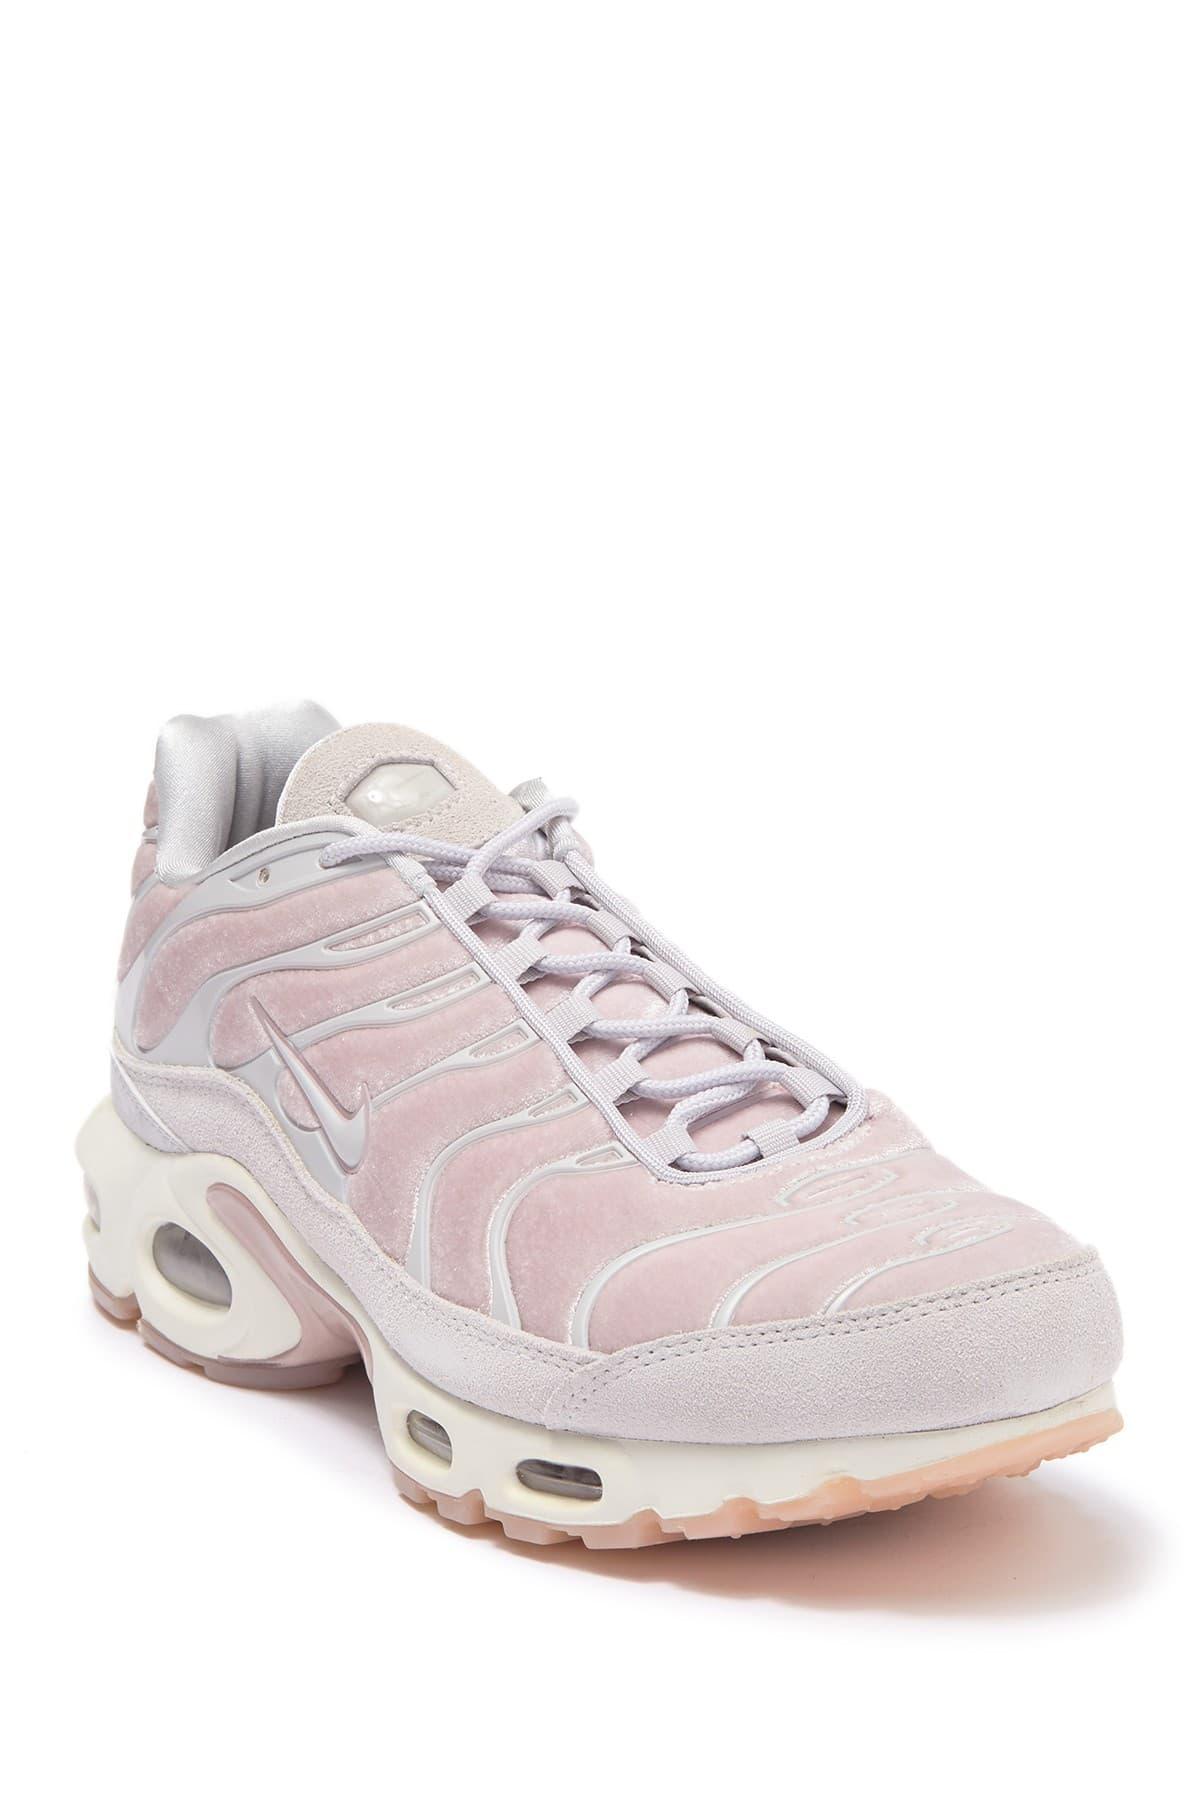 Nike Air Max Plus Velvet Particle Rose Hotsell, SAVE 45% - aveclumiere.com